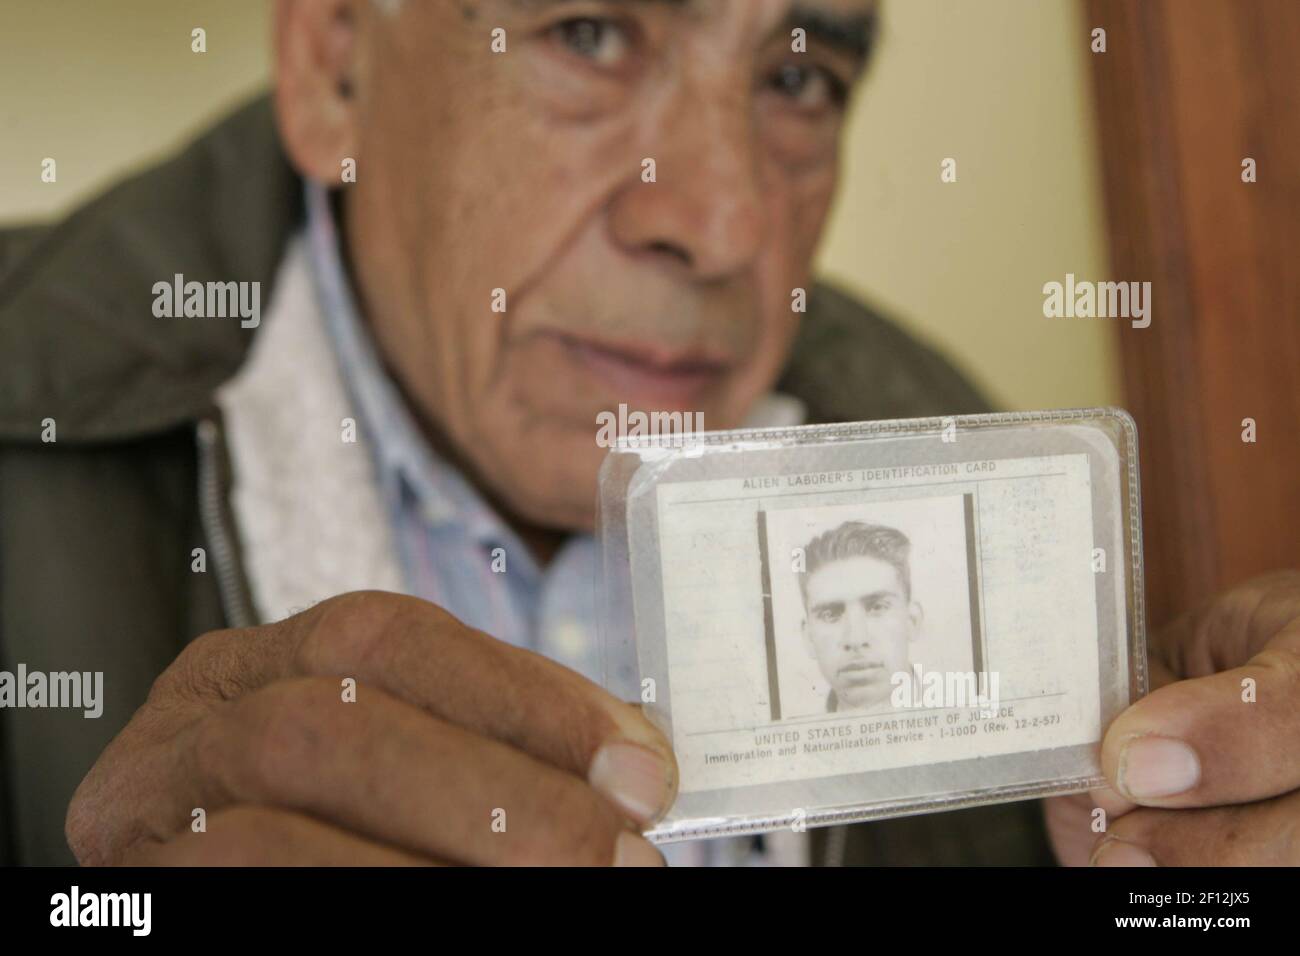 https://c8.alamy.com/comp/2F12JX5/former-bracero-manuel-perez-74-of-san-jose-holds-his-alien-laborers-identification-card-also-known-as-la-mica-cafe-issued-to-him-by-the-united-states-during-the-wwii-era-program-at-the-mexican-consulate-in-san-jose-califonria-the-bracero-program-recruited-thousands-of-men-from-mexico-to-to-work-in-agriculture-canneries-and-railroad-jobs-in-the-united-states-from-1942-46-while-us-nationals-fought-in-the-war-and-then-from-1947-64-photo-by-maria-j-avilasan-jose-mercury-newsmctsipa-usa-2F12JX5.jpg